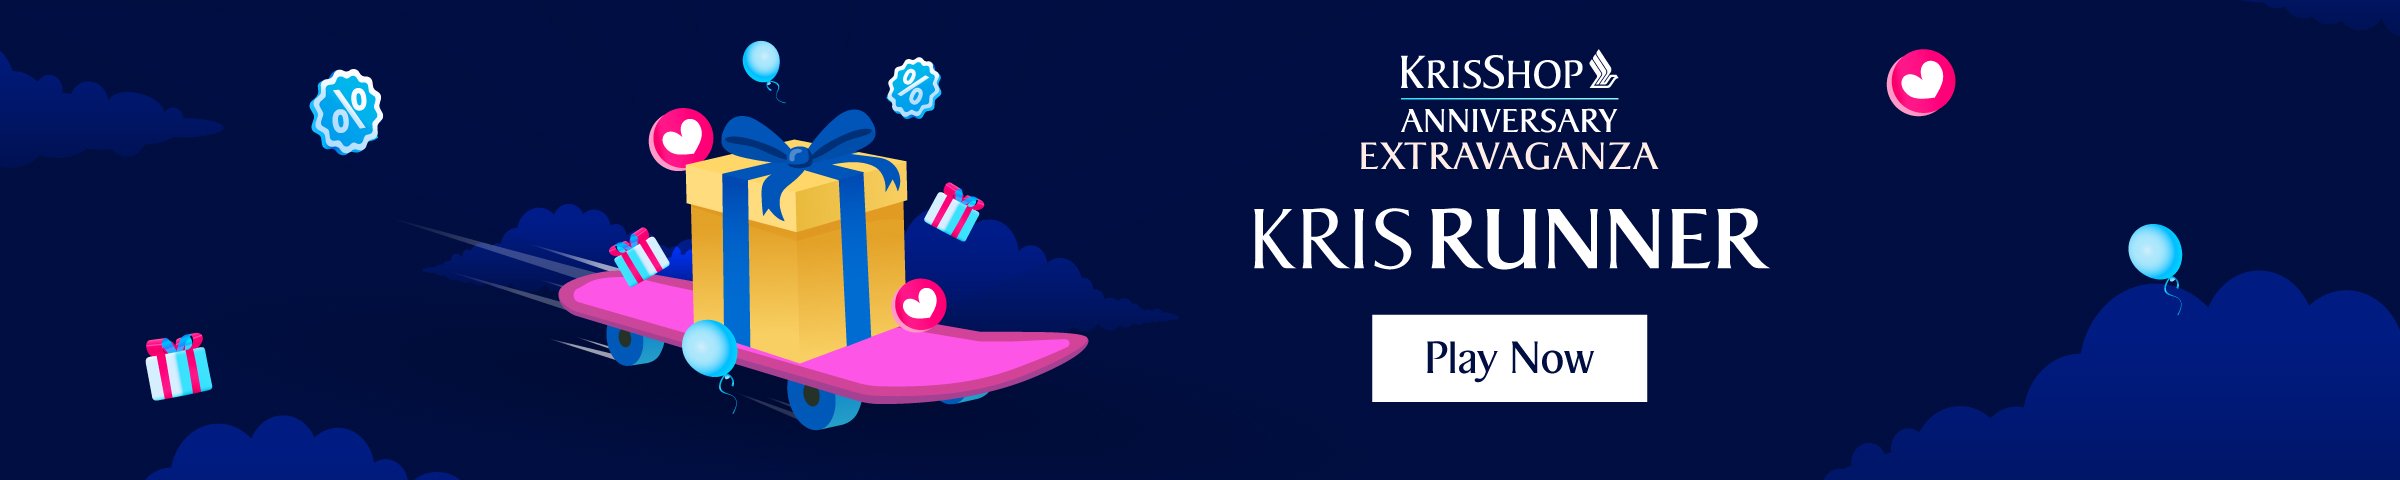 Play KrisRunner For Additional Lucky Draw Entries